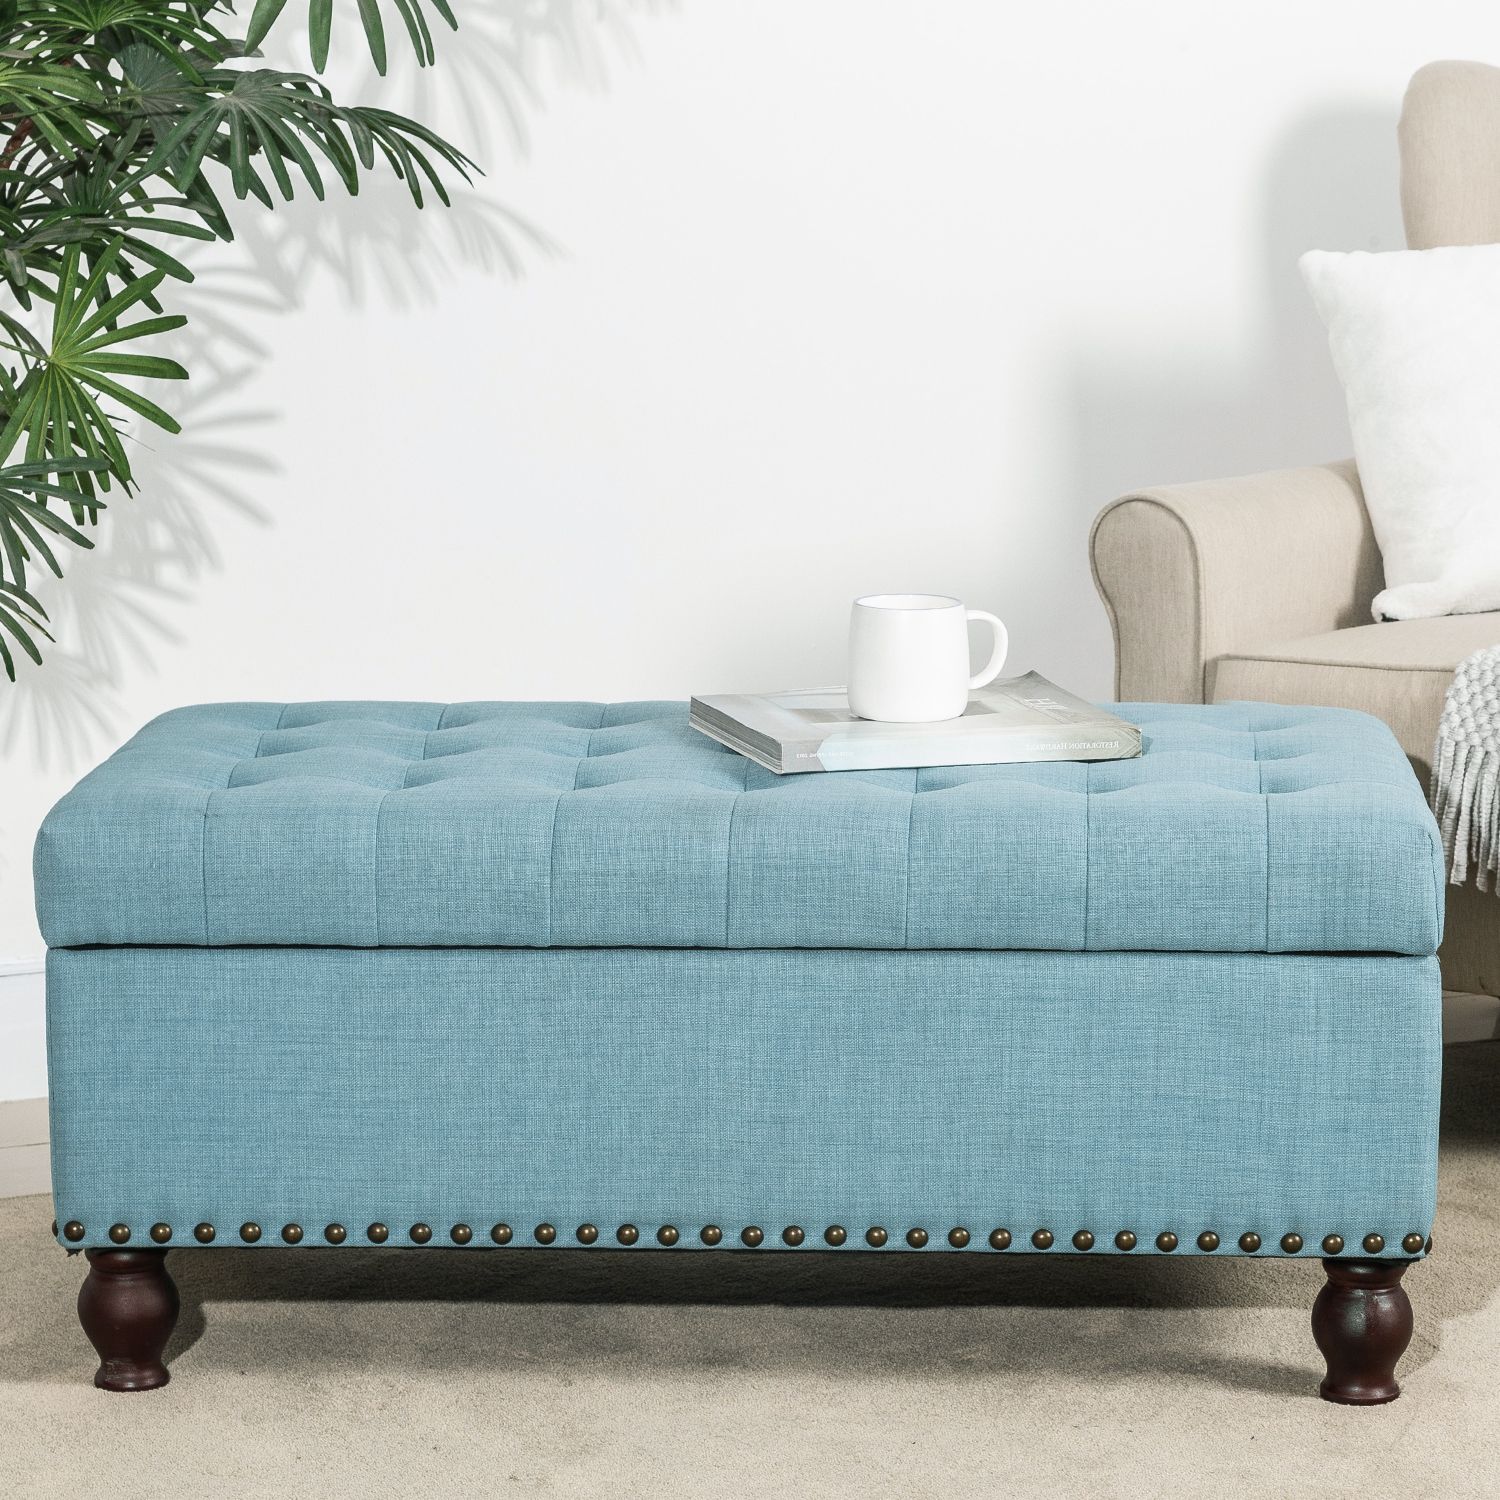 Current Joveco Linen Fabric Rectangular Tufted Lift Top Storage Ottoman Intended For Fabric Storage Ottomans (View 10 of 10)